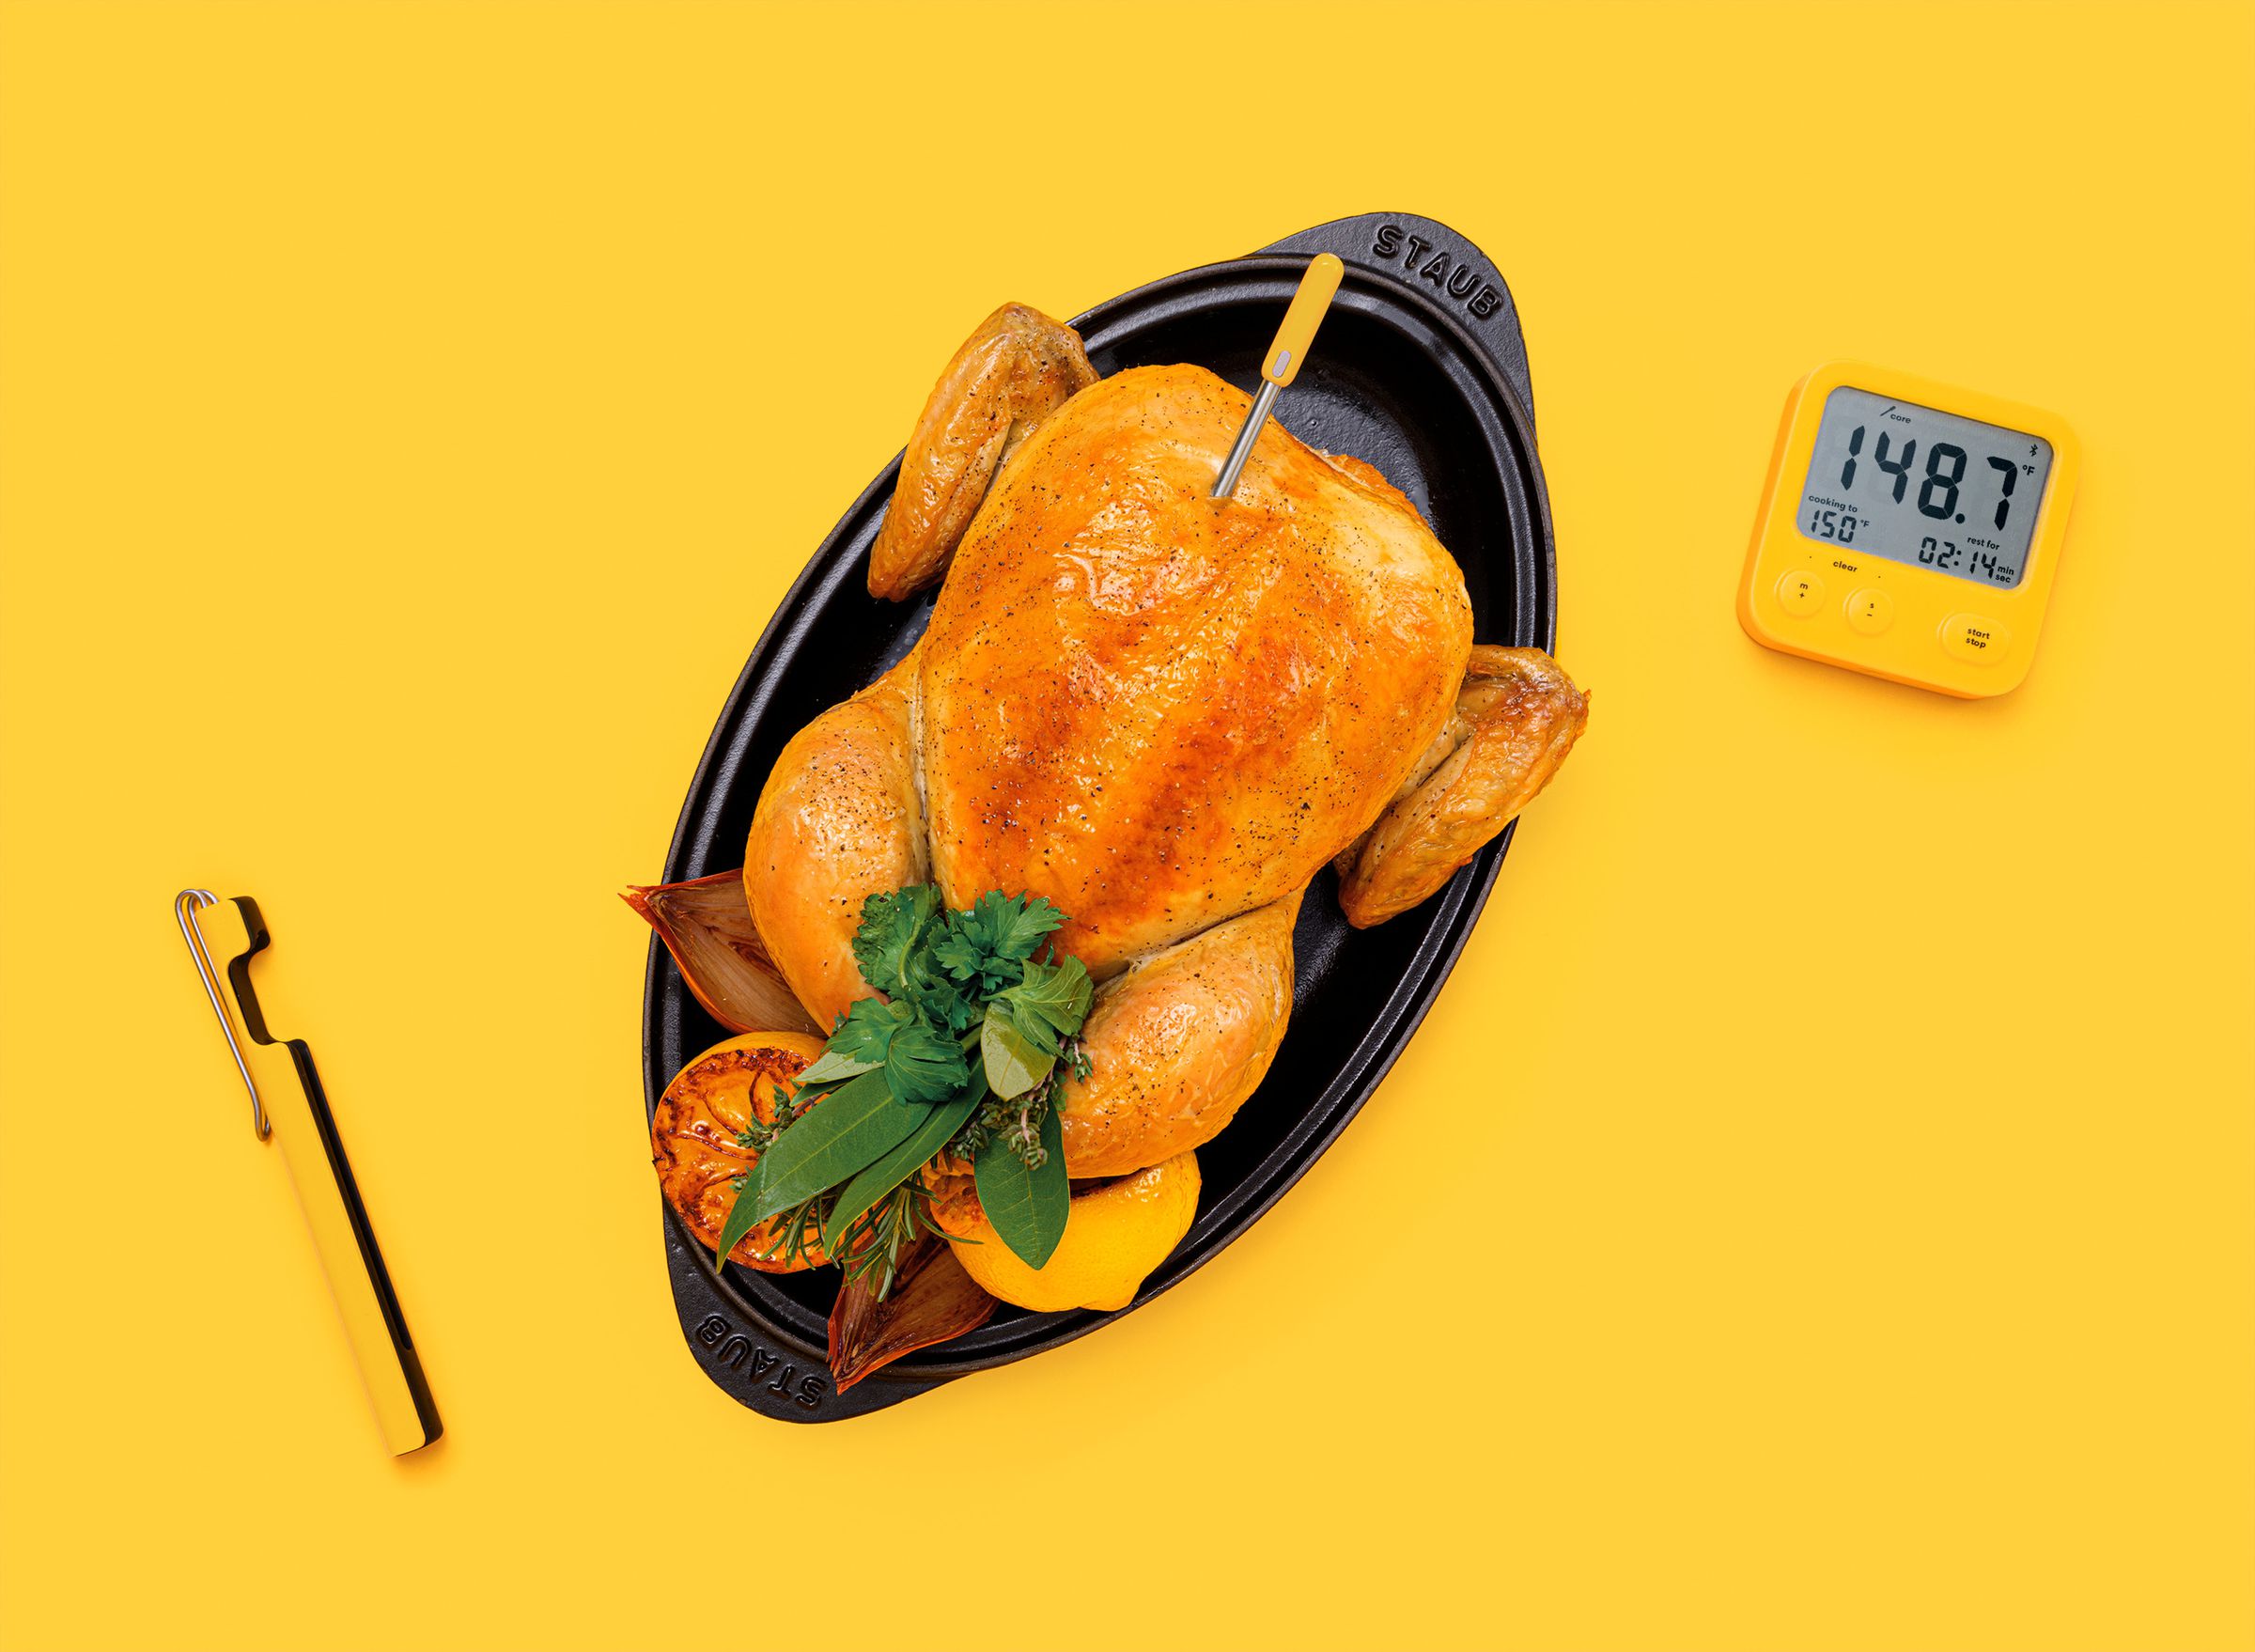 The Combustion Predictive Thermometer tells you ahead of time when your food will reach the perfect temperature.